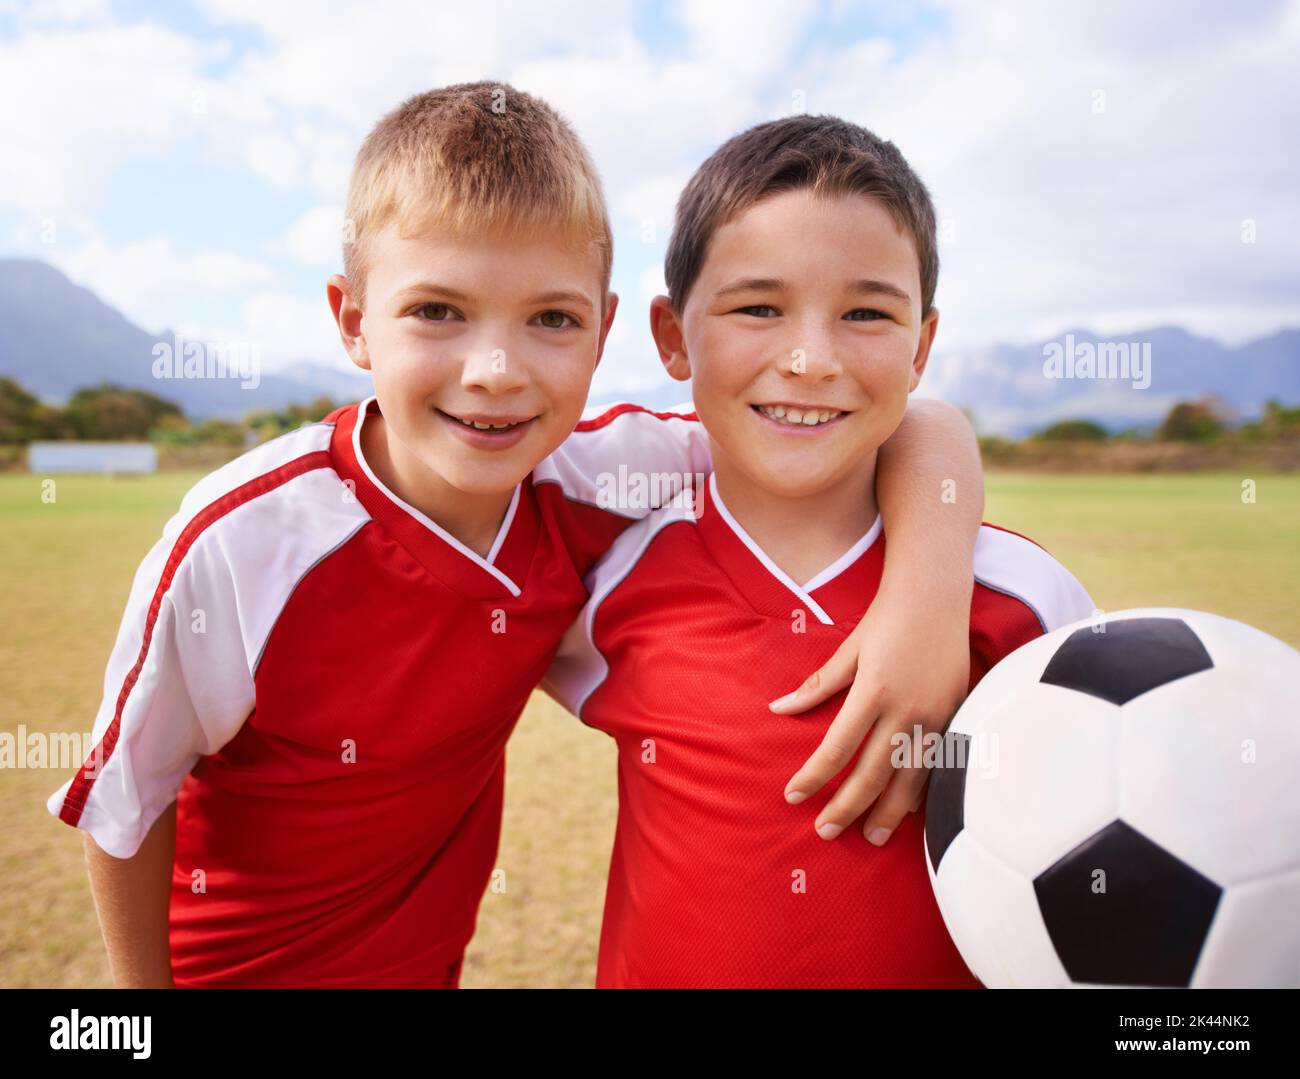 Team mates and best friends. Portrait of 2 boys smiling and holding a soccer ball. Stock Photo